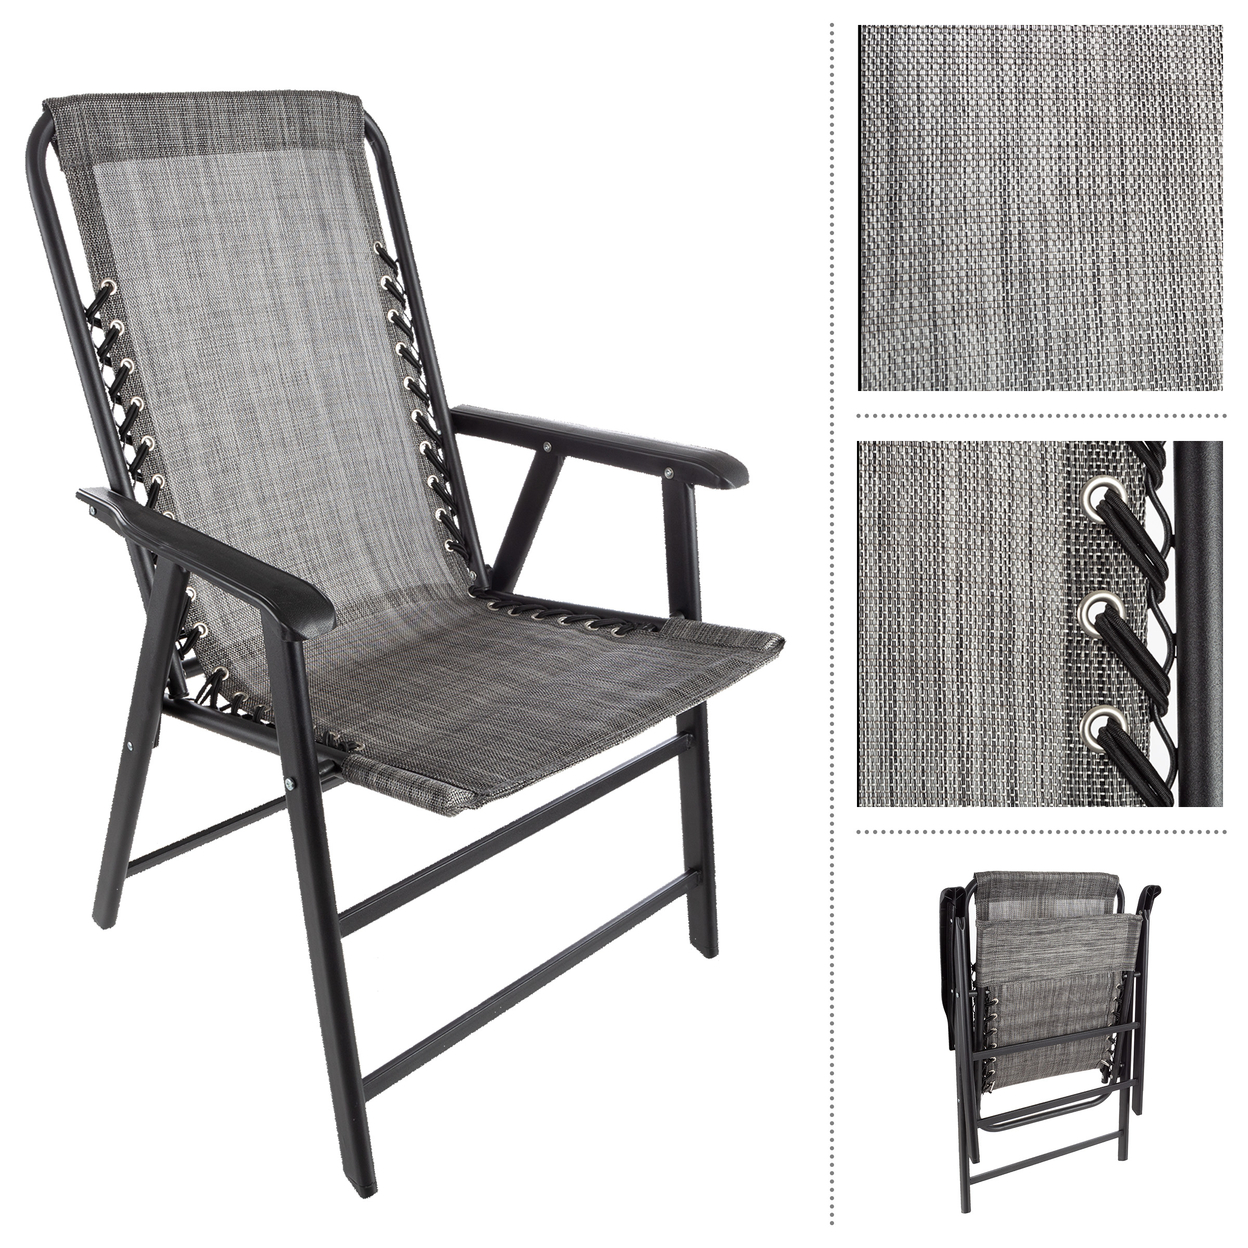 Folding Camping Chairs 2 Set Lawn Chairs Portable Lounge Chairs, Gray